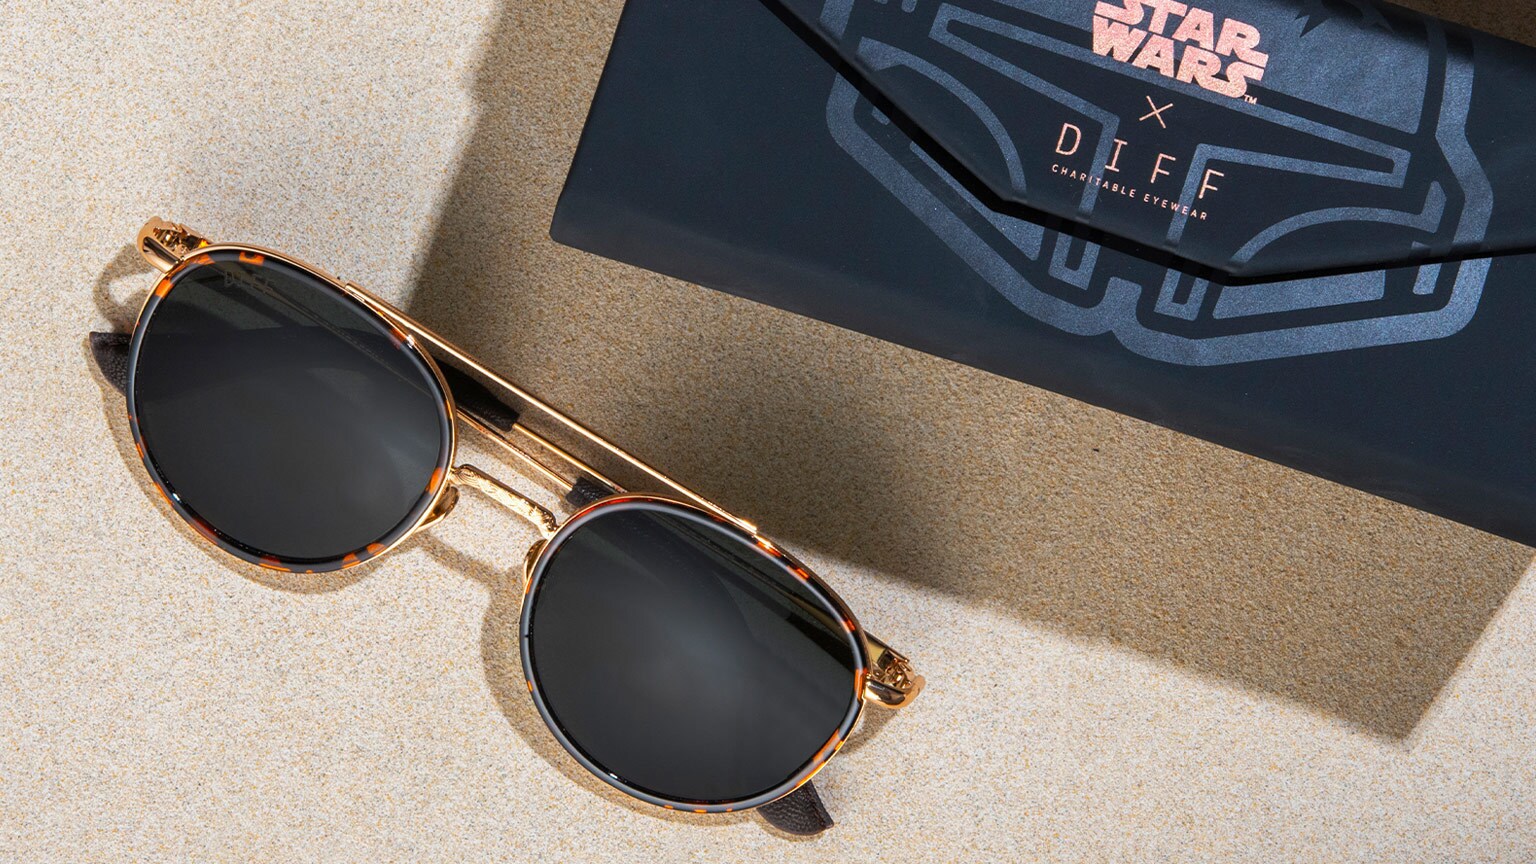 Star Wars | DIFF Launches Eyewear Celebrating an Empire